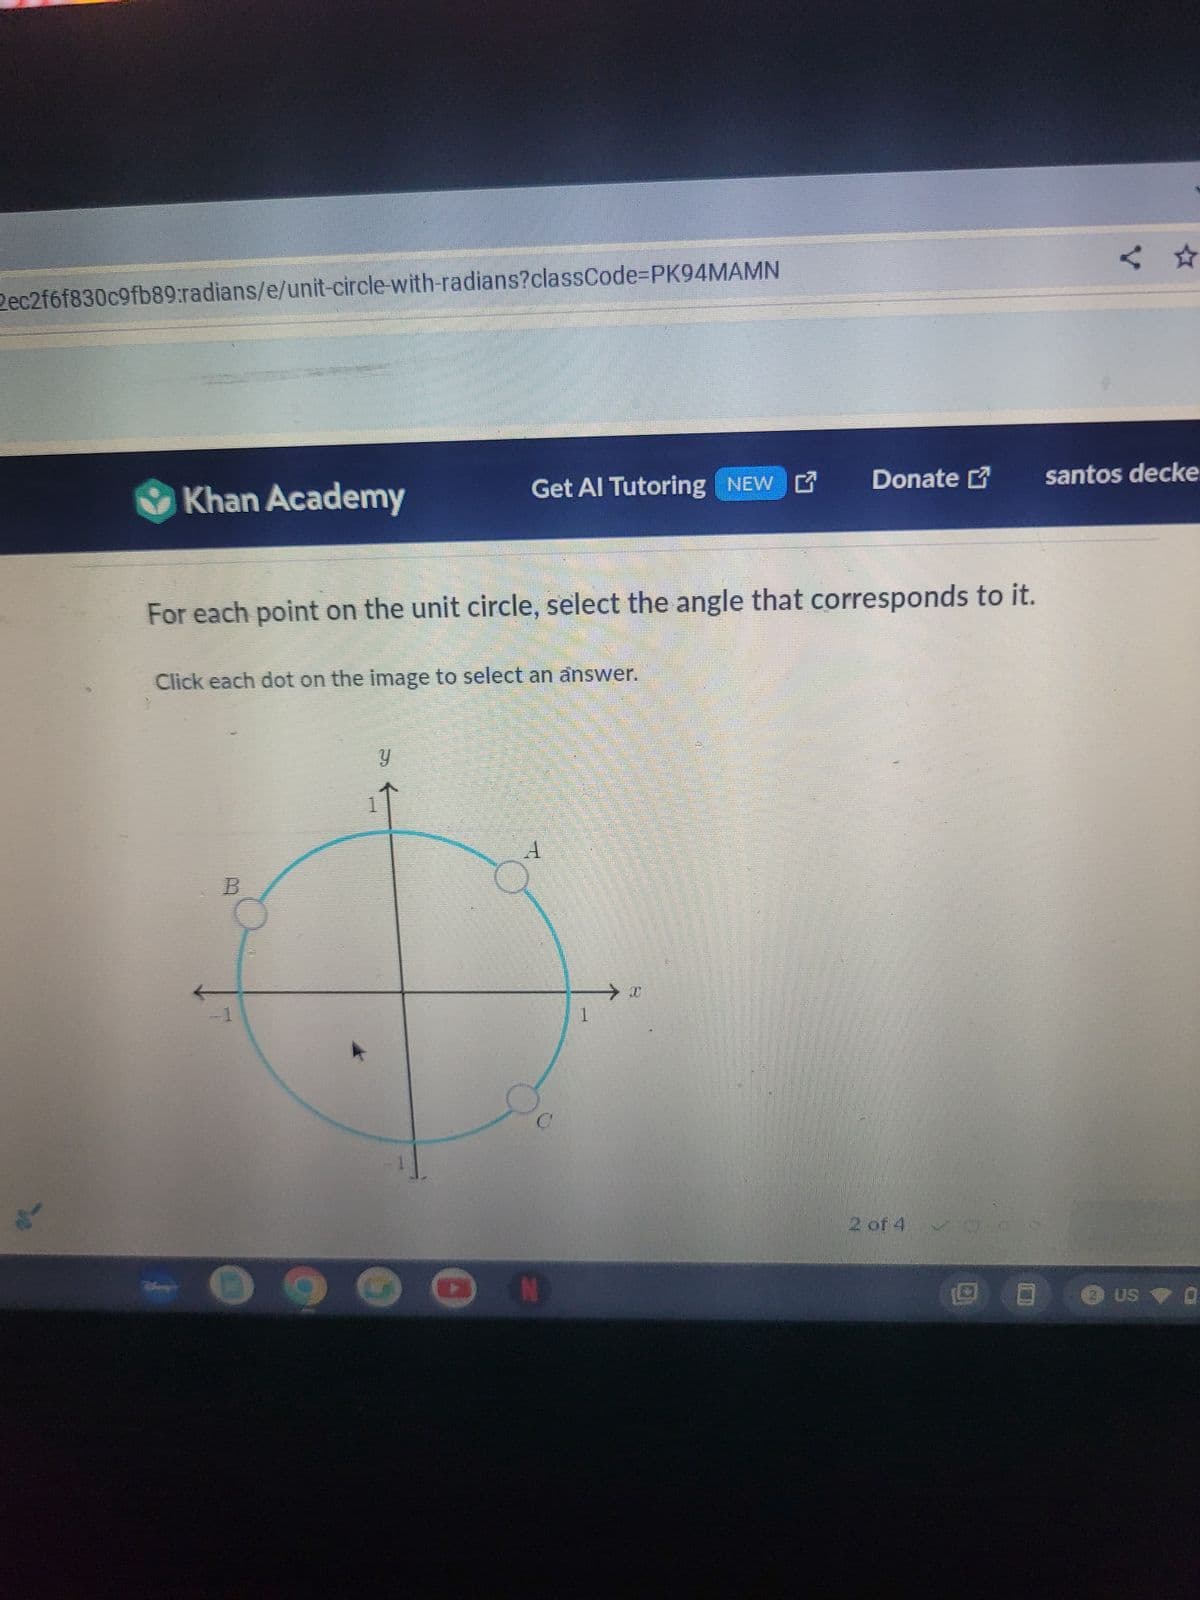 2ec2f6f830c9fb89:radians/e/unit-circle-with-radians?classCode=PK94MAMN
<✰
Khan Academy
Get Al Tutoring NEW Donate
santos decke
For each point on the unit circle, select the angle that corresponds to it.
Click each dot on the image to select an answer.
B
y
A
1
N
2 of 4
• US